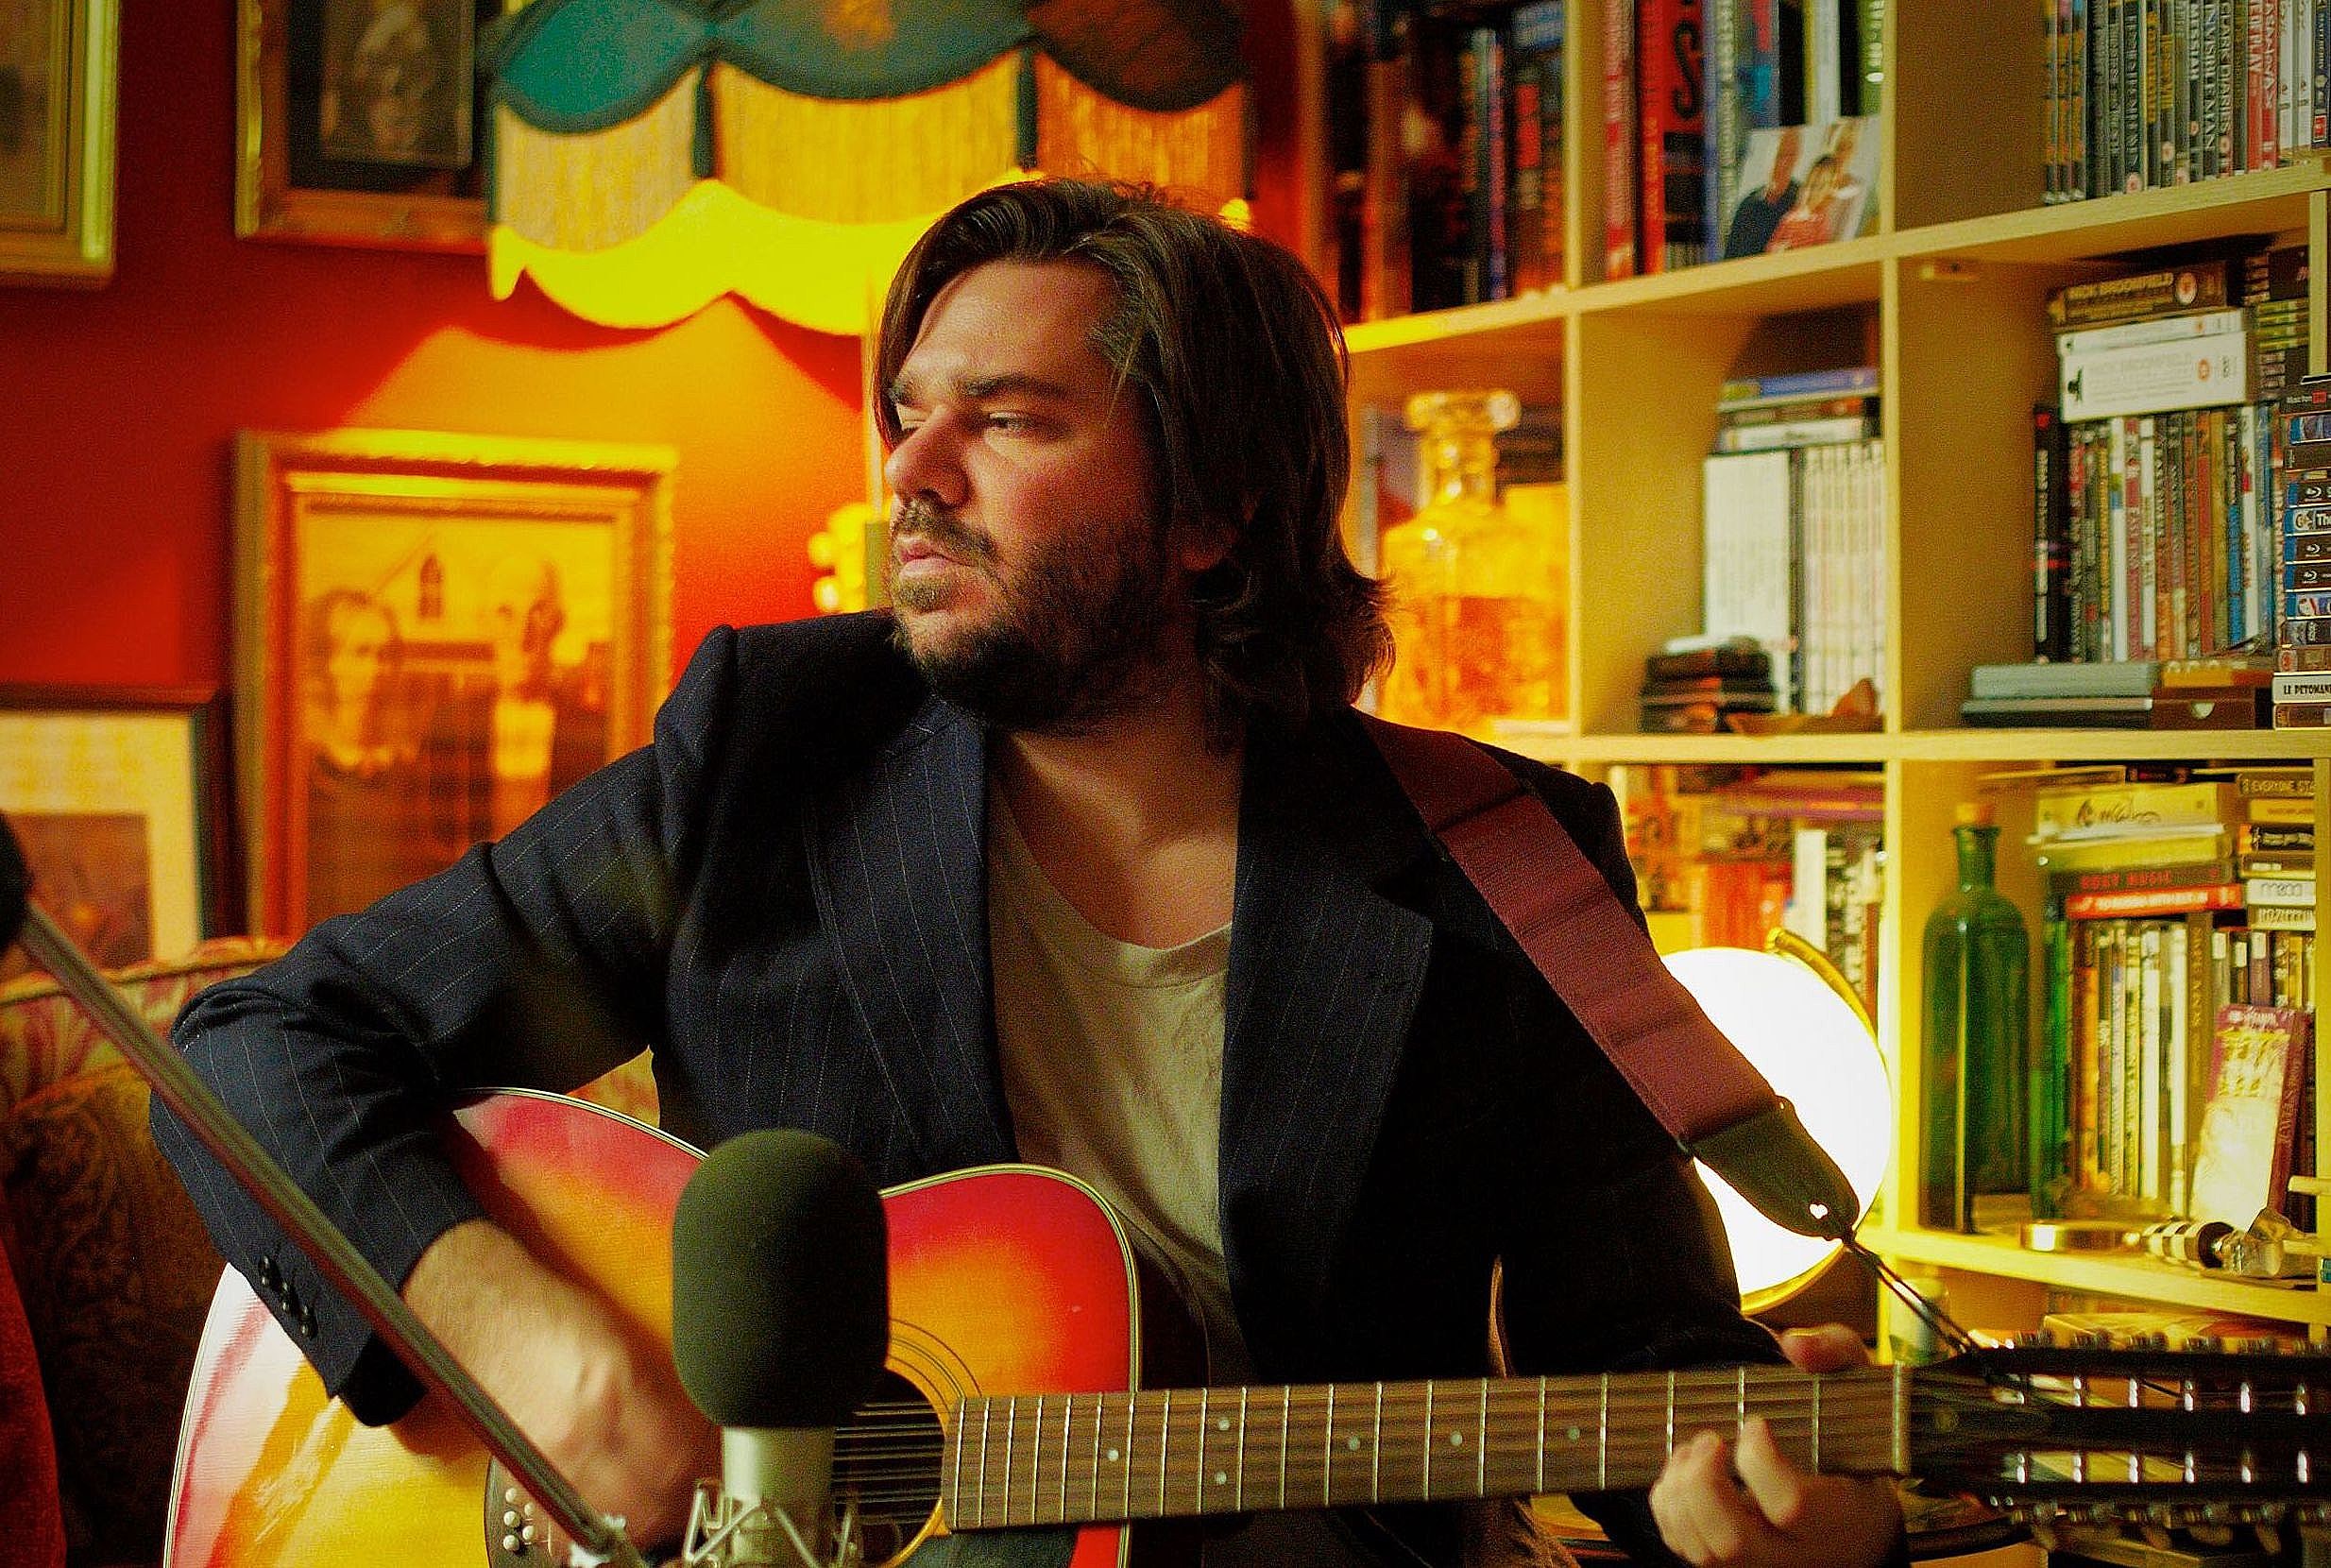 Matt Berry interview: What We Do in the Shadows, his music & more